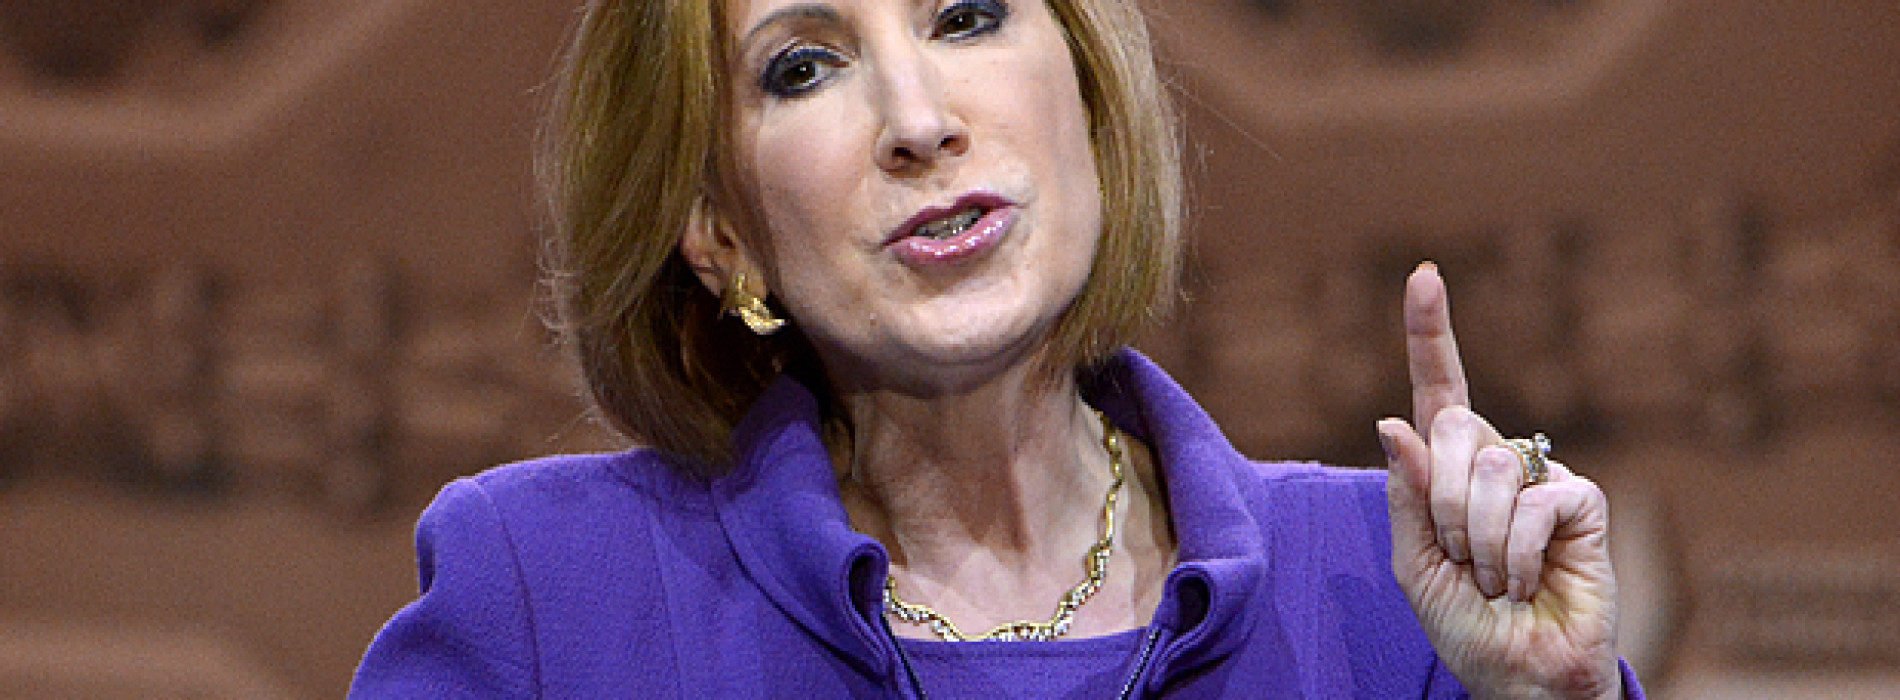 Carly Fiorina: Hillary has “blood on her hands”